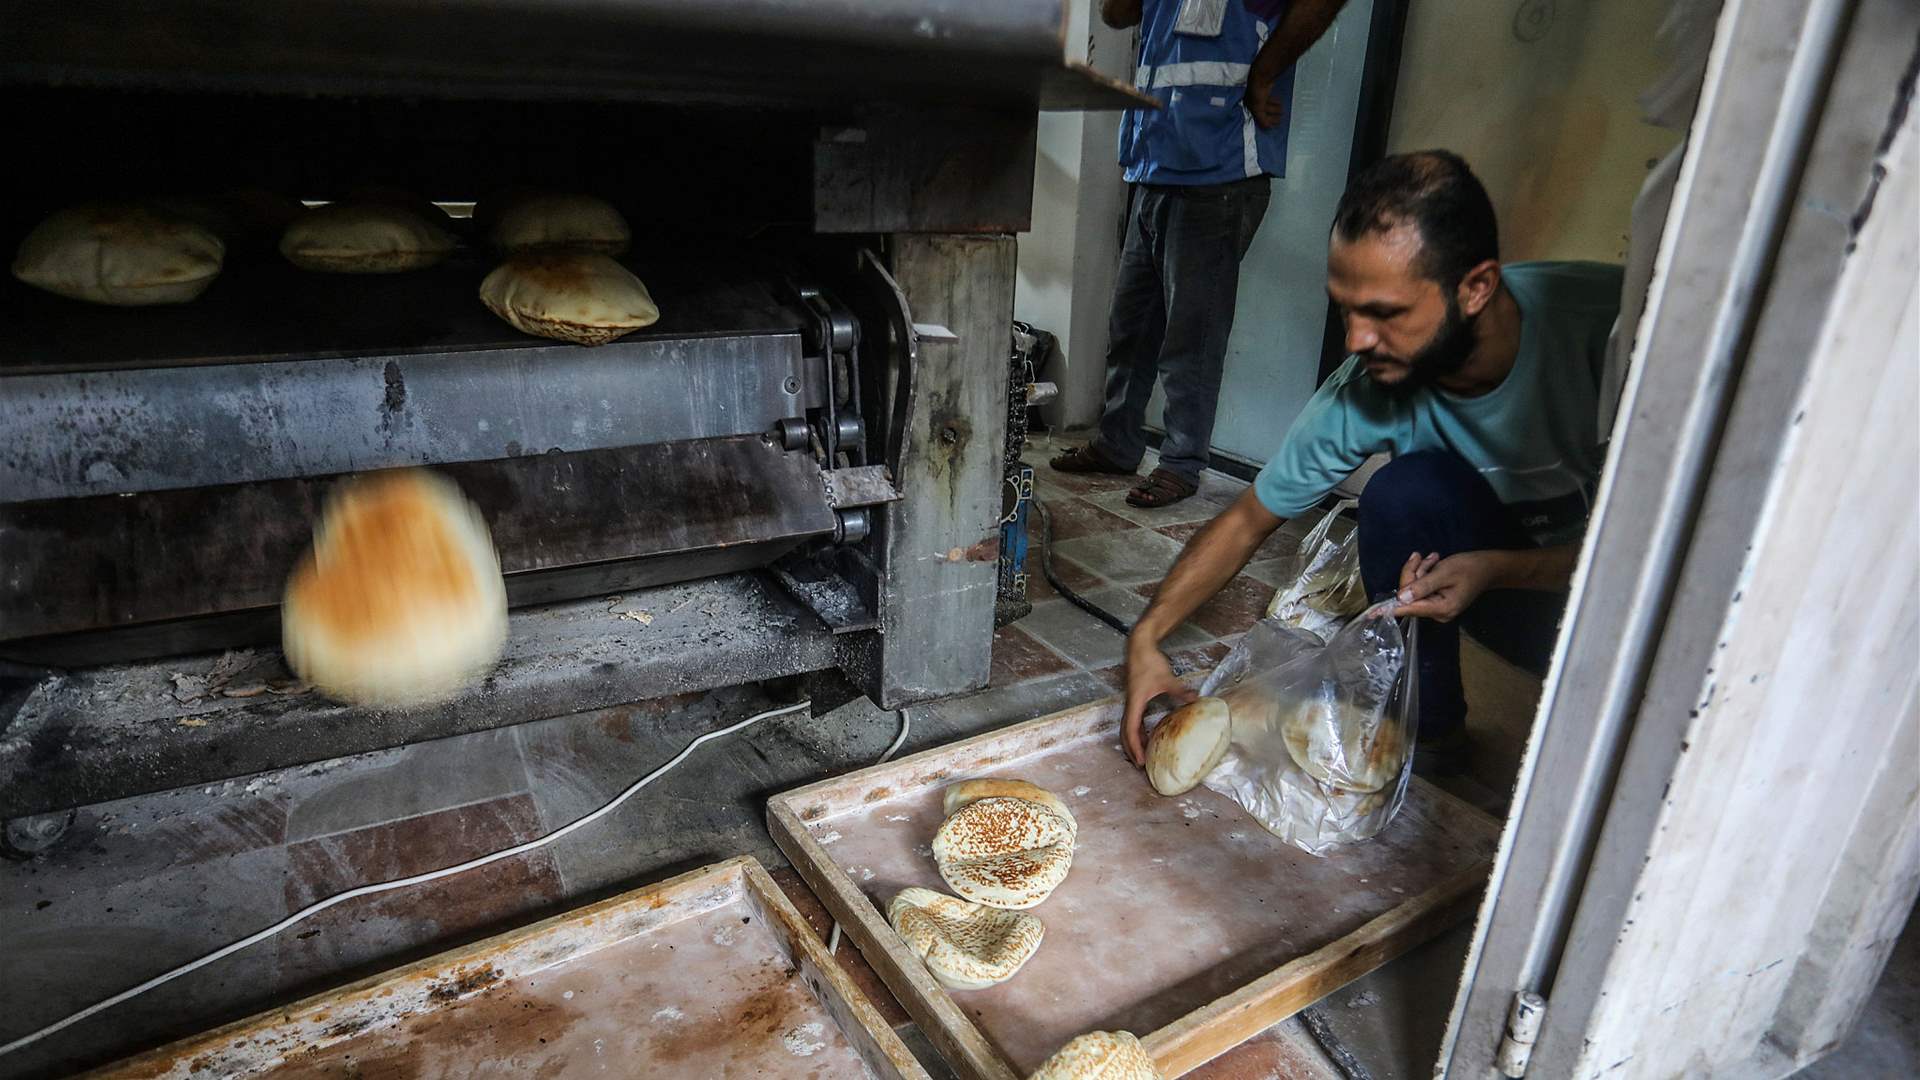 Gaza nearing starvation: WFP warns of dire conditions